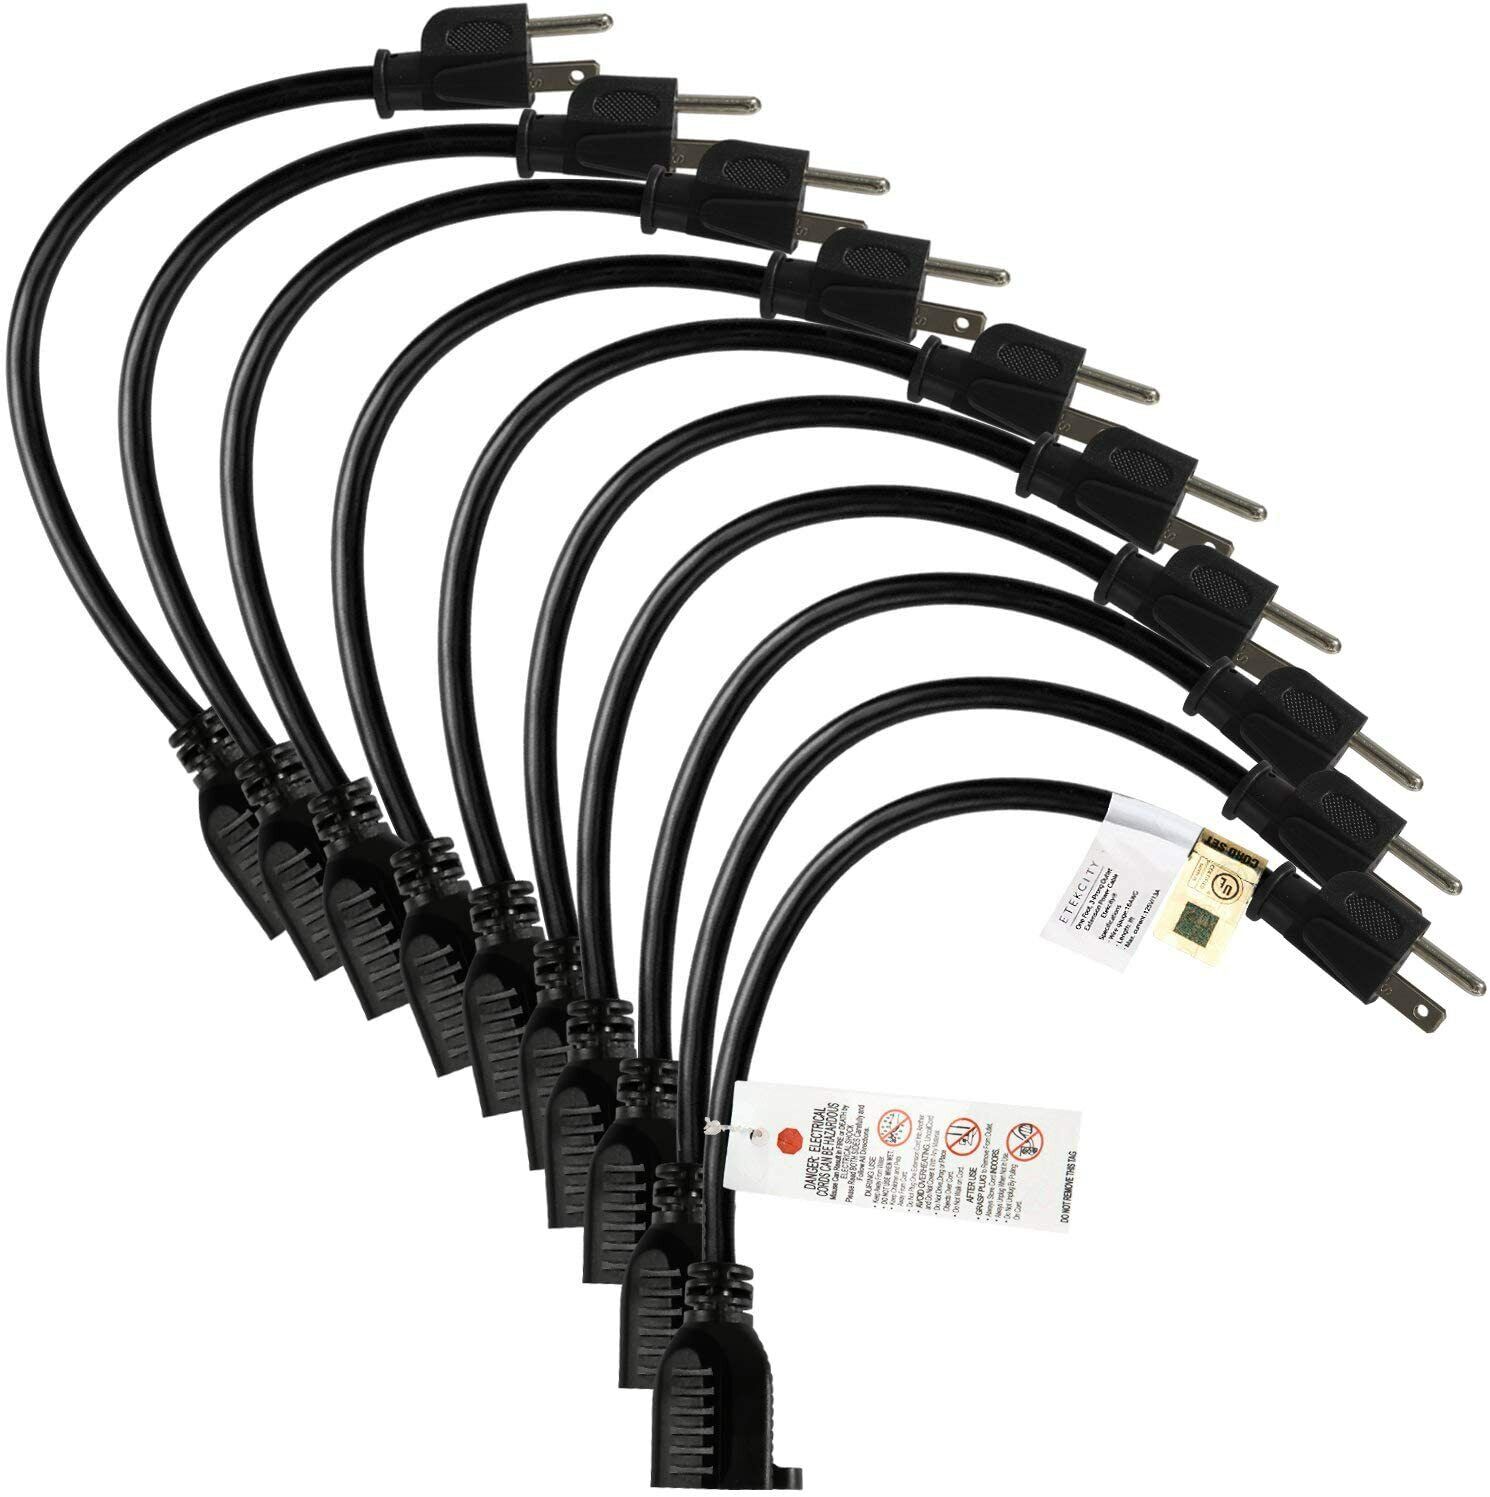 10 Pack Short Power Extension Cord 1ft cable 3 Prong 16AWG/13A UL Listed Black